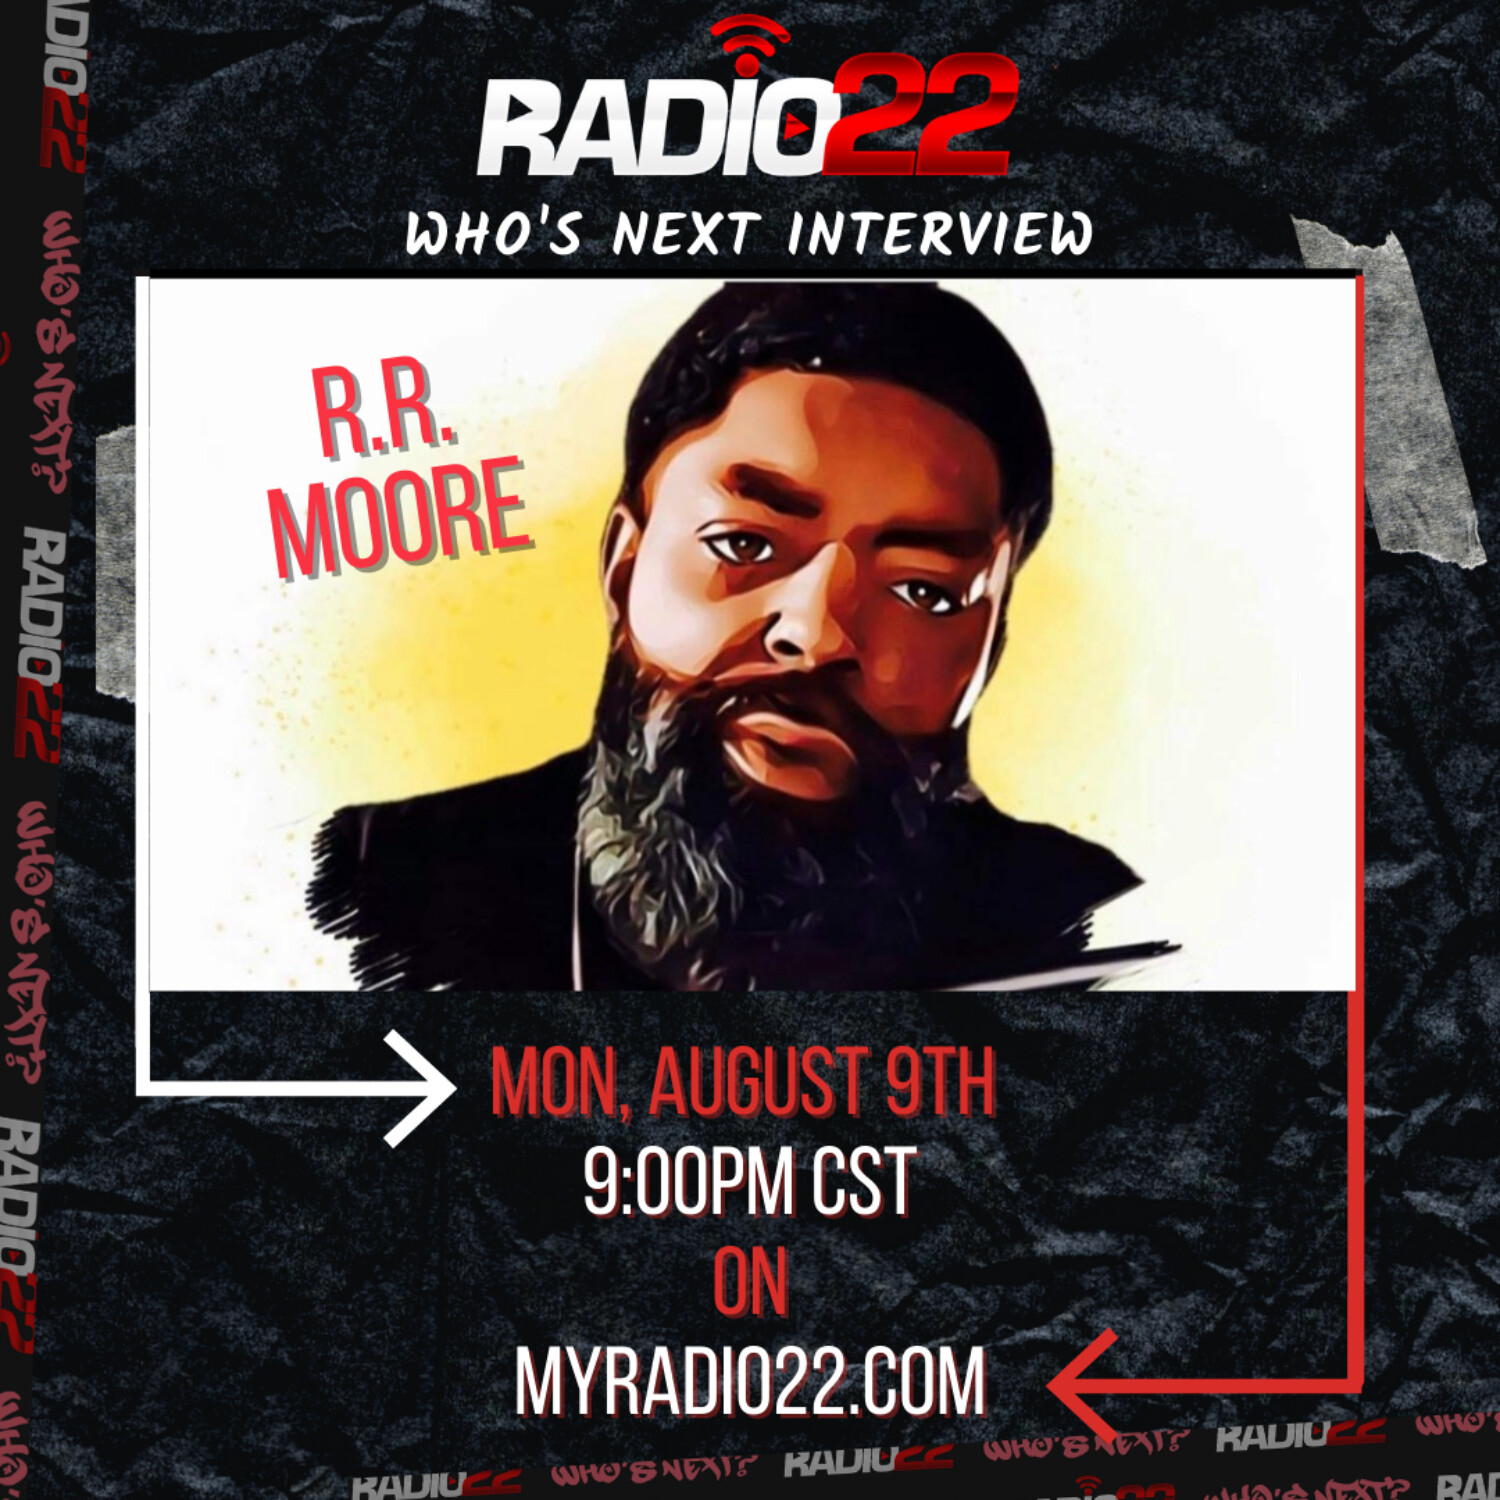 Who's Next: R.R. Moore Interview